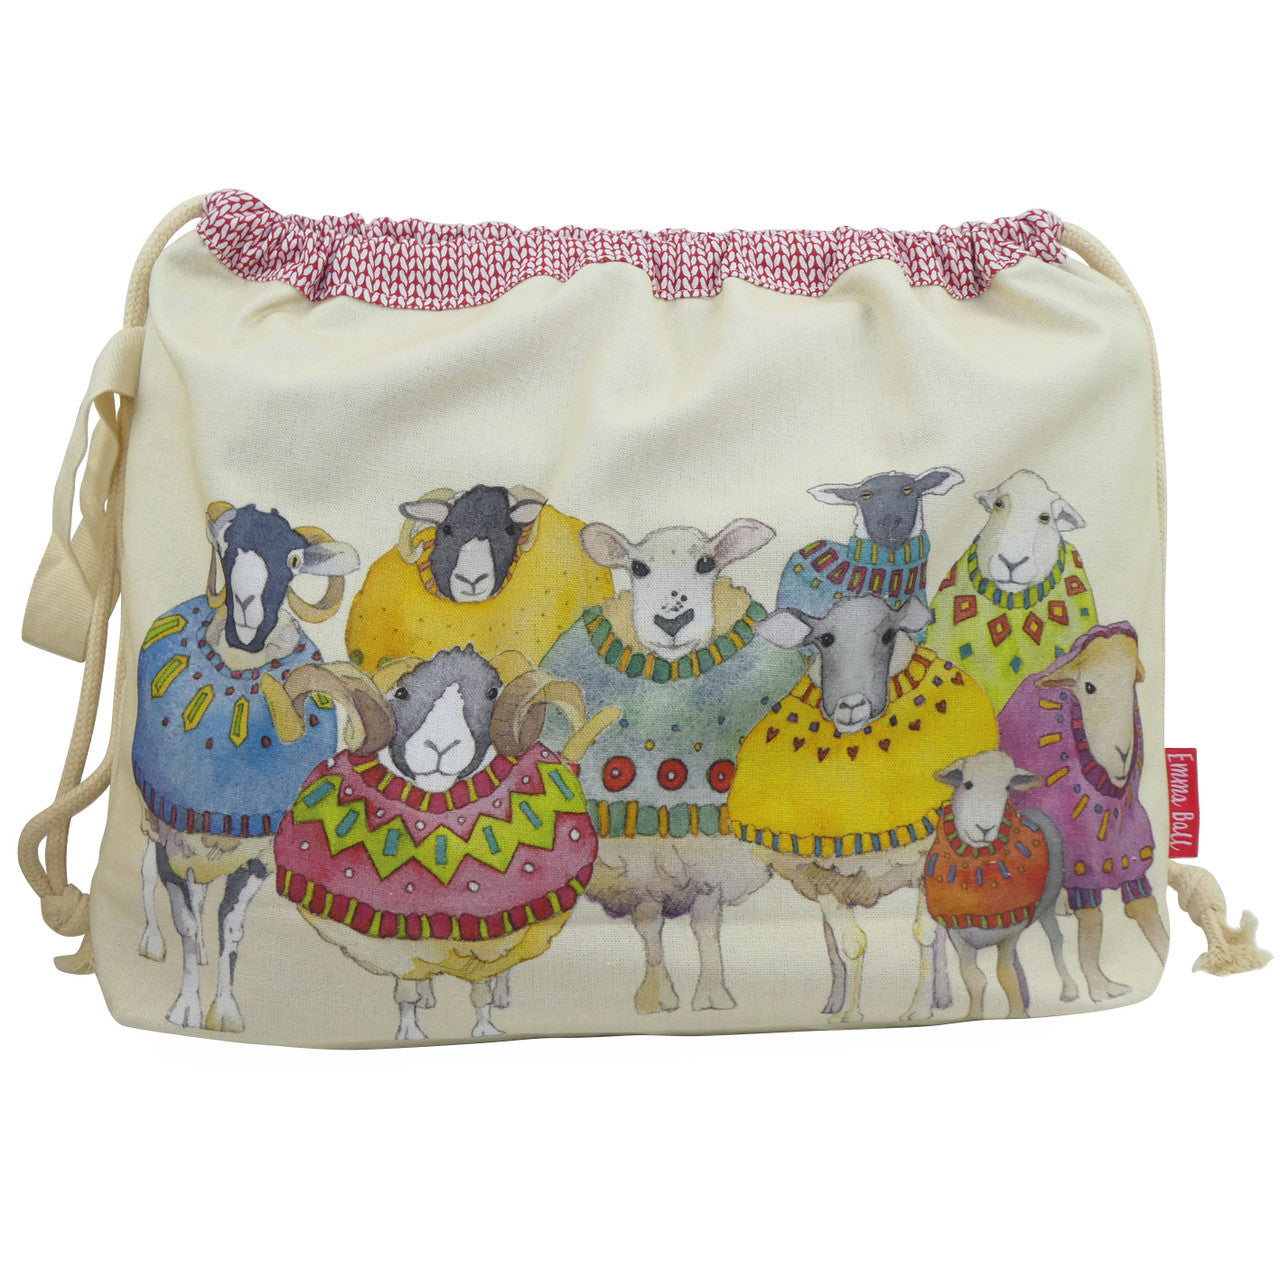 Sheep in Sweaters Drawstring Cotton Bag from Emma Ball.